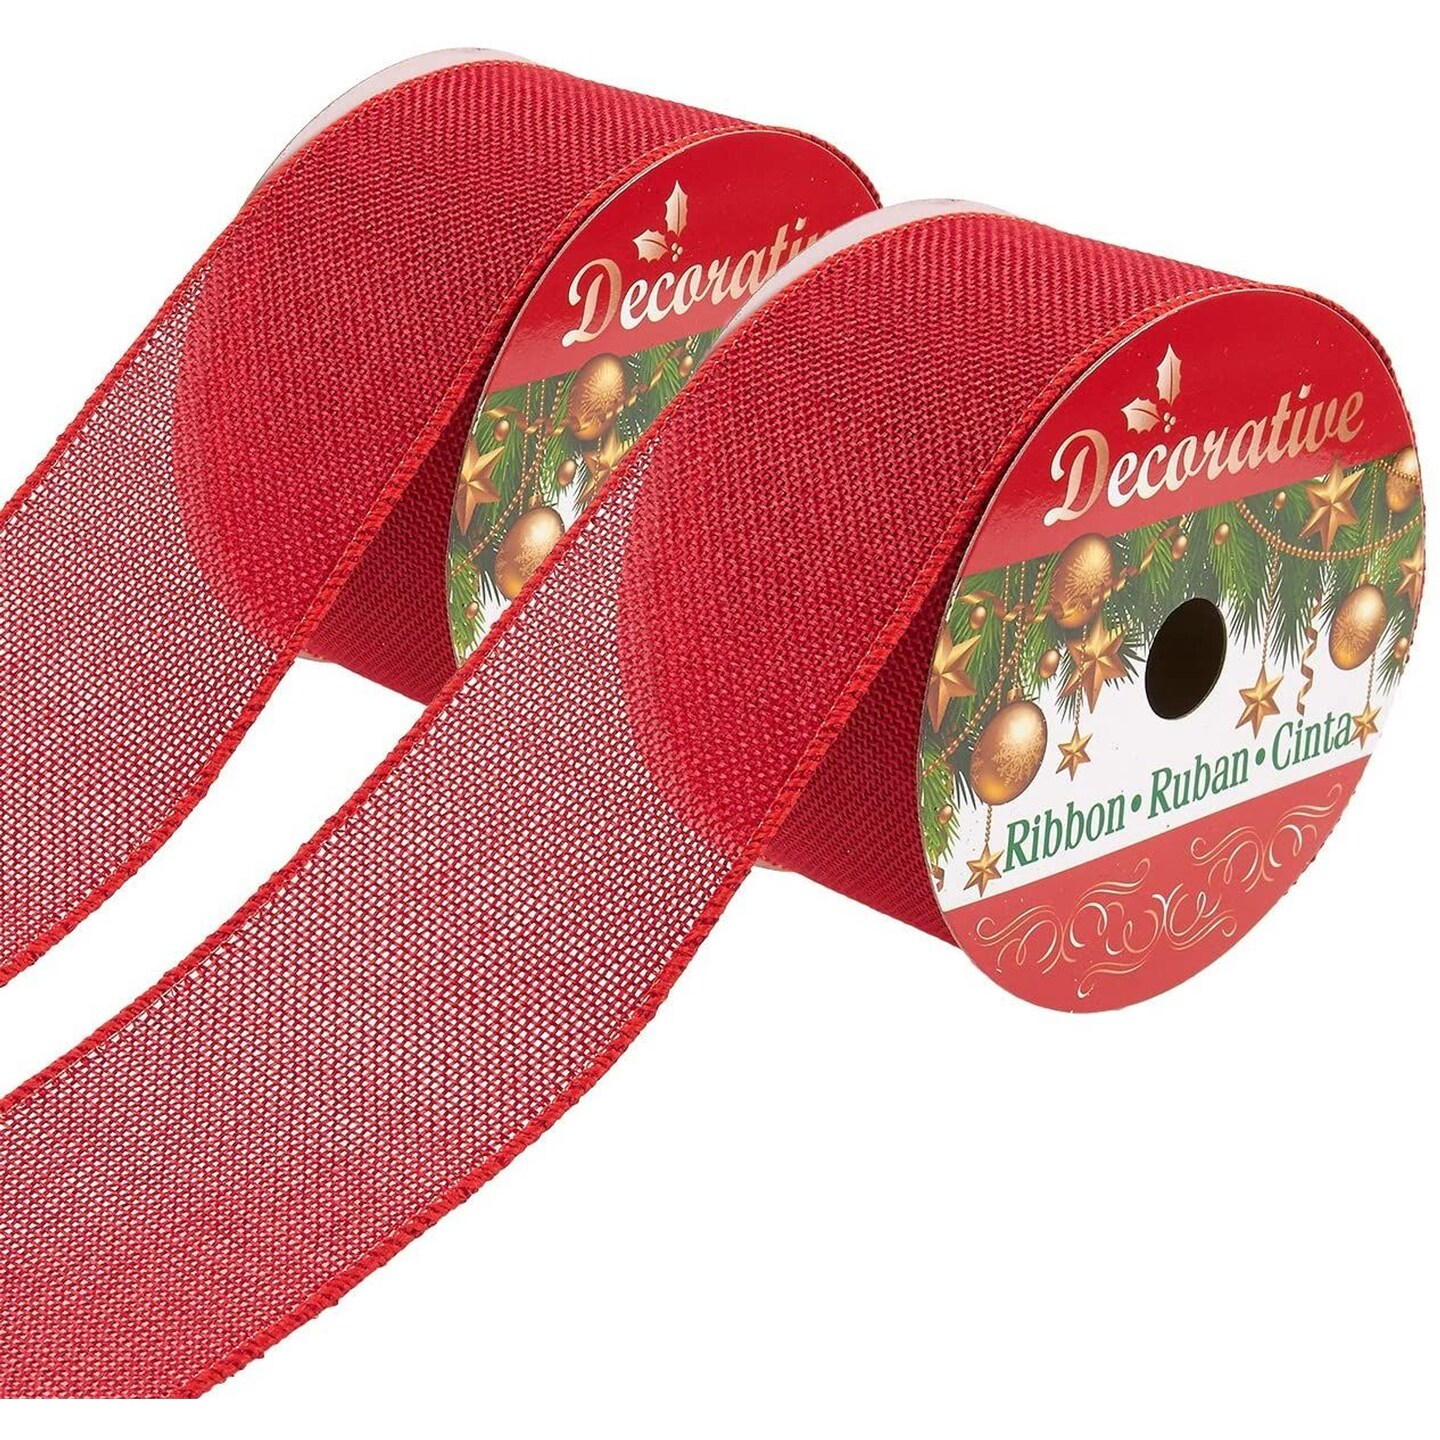 2 Pack Red Burlap Ribbon for Crafts, Wreaths, Bows, Christmas Tree